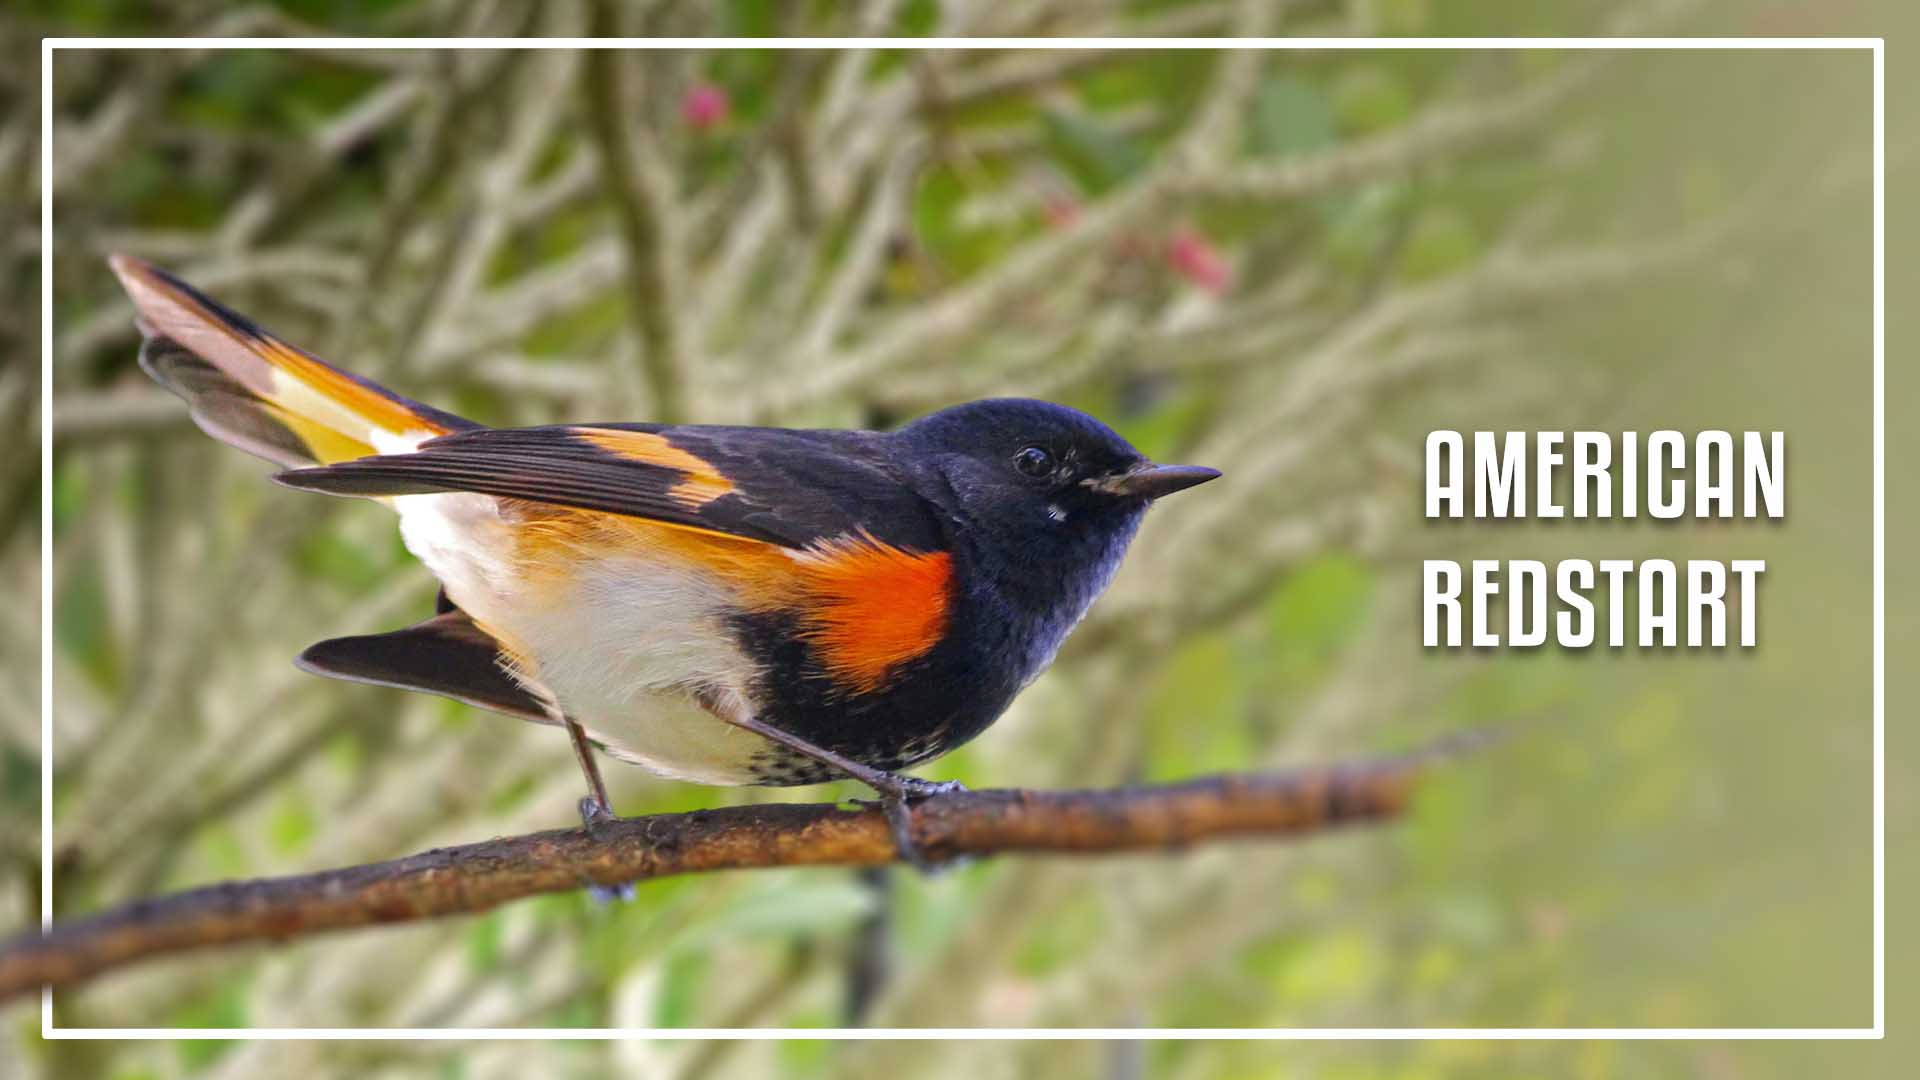 American Redstart is a black bird with orange wings and white belly 